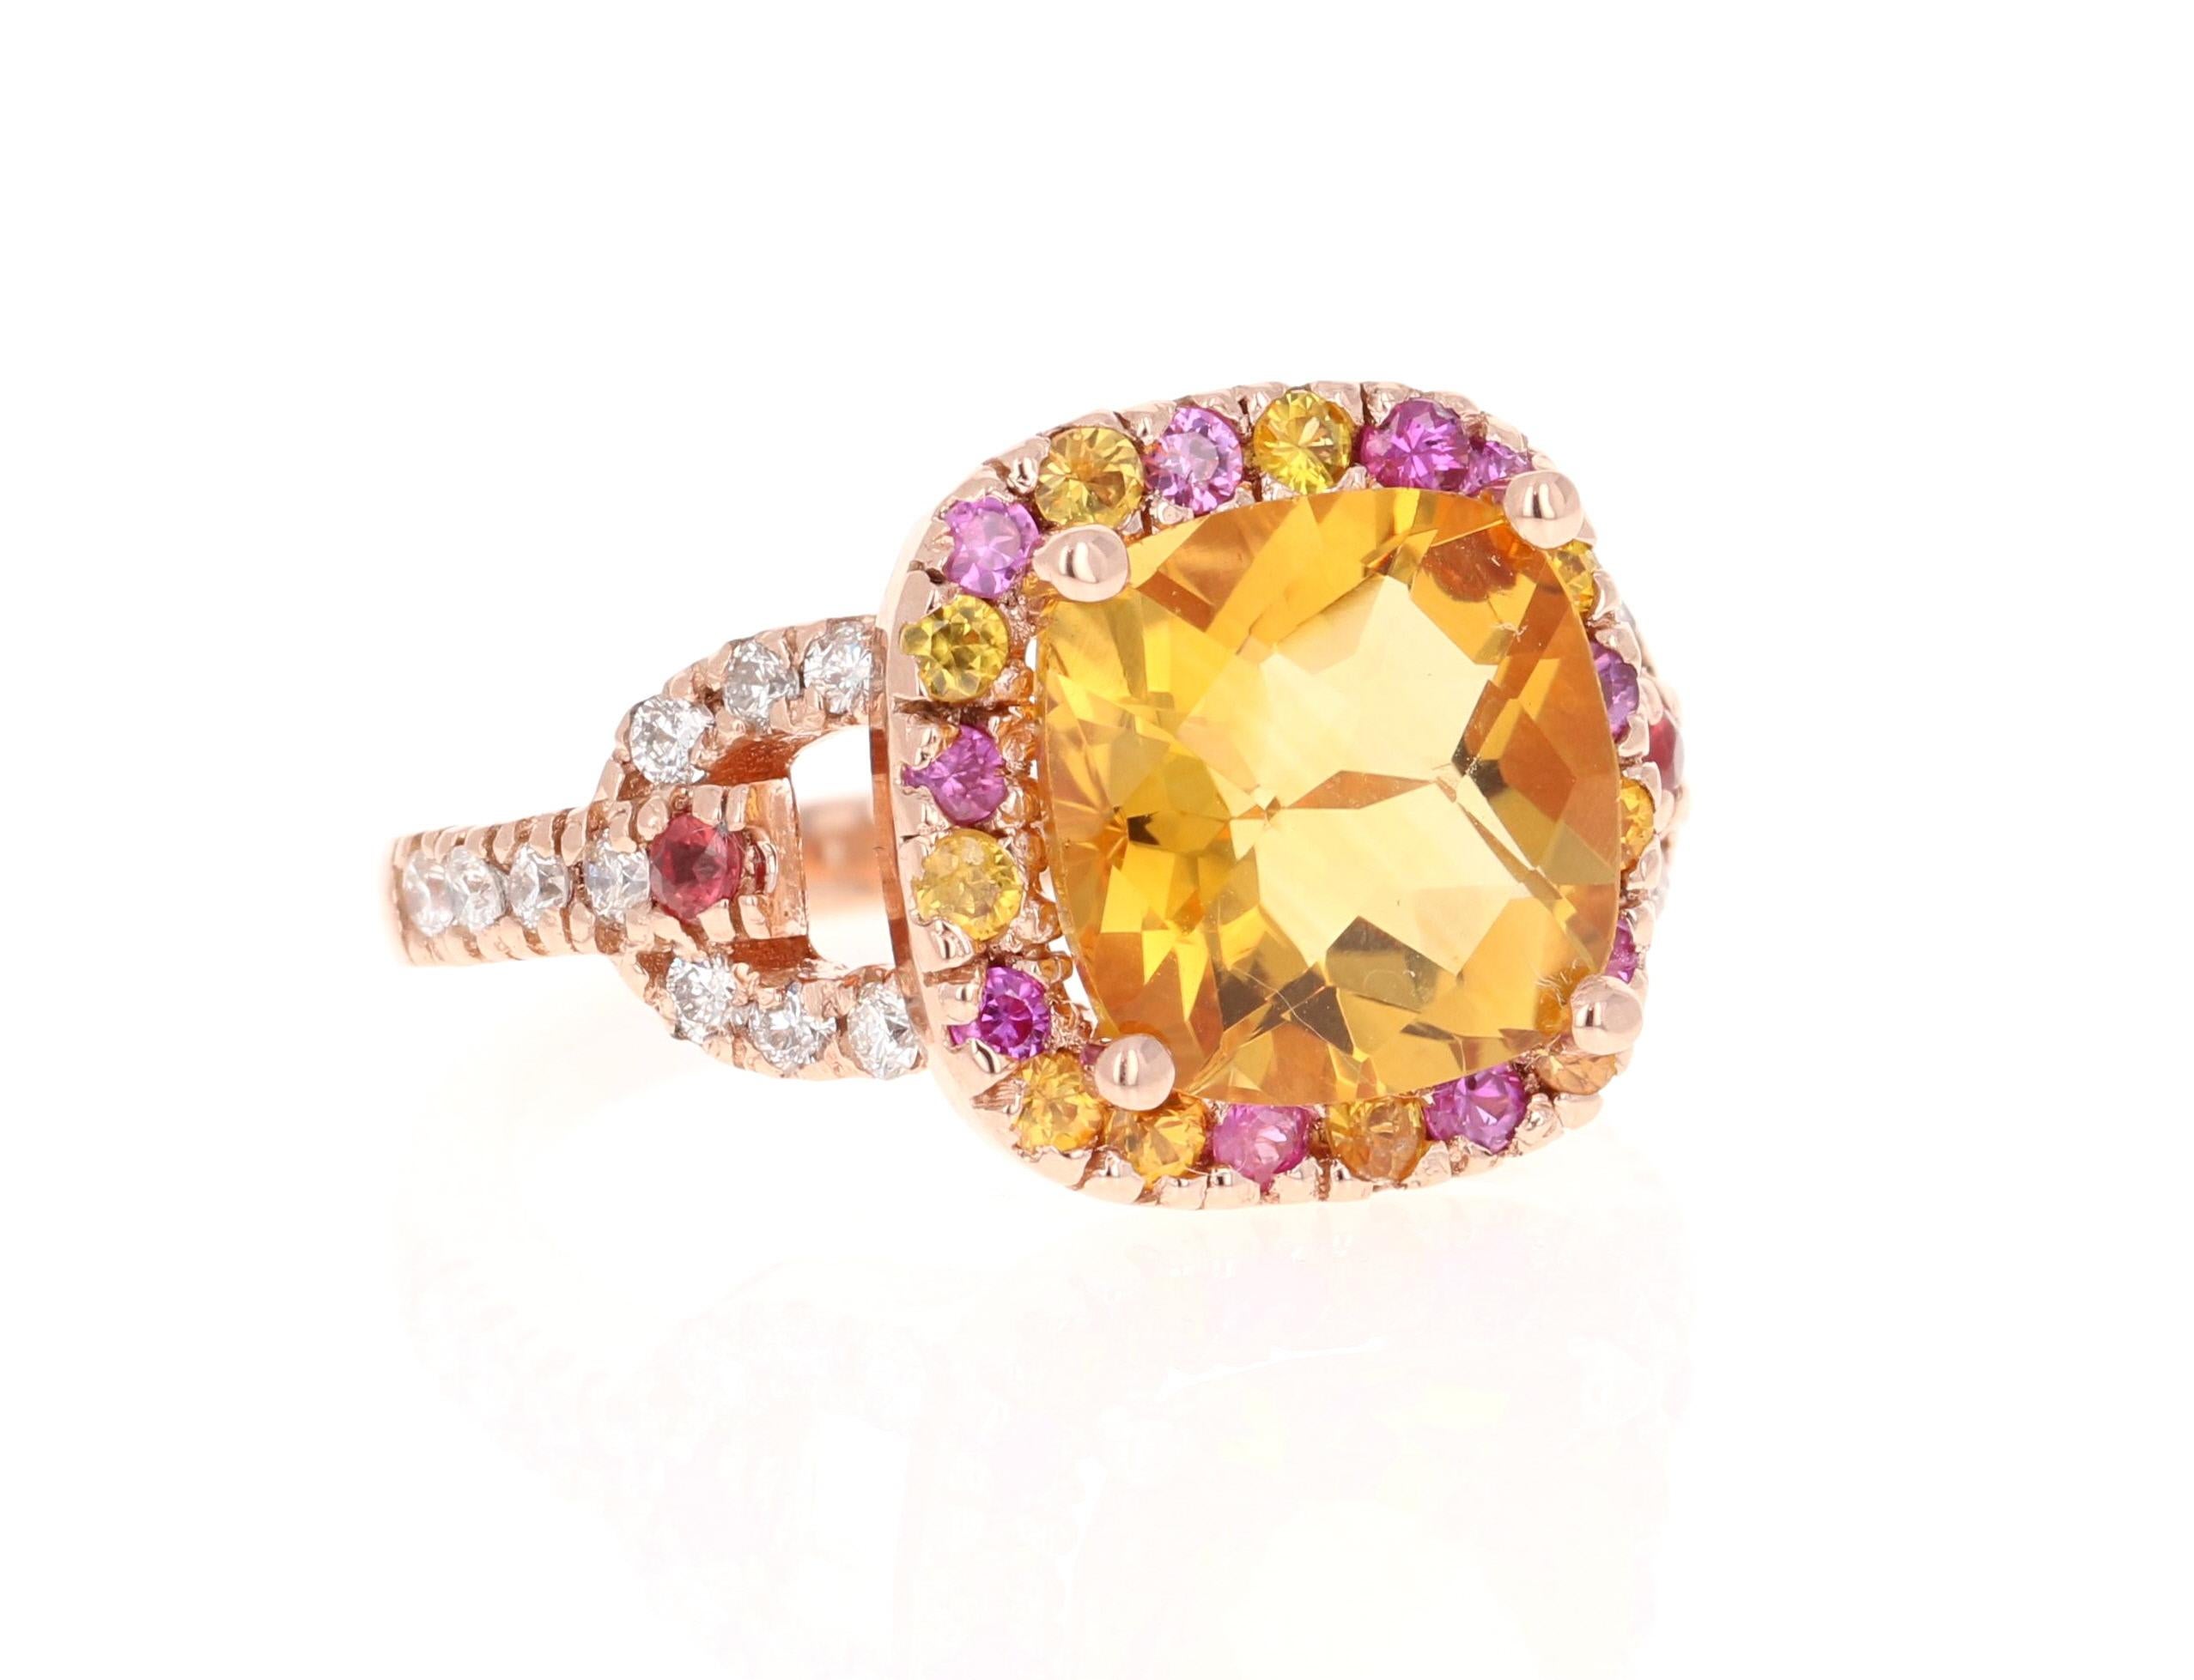 A Stunning and Unique piece to say the least! 

This magnificent ring has a bold Cushion Cut Citrine that is blazing yellow! It weighs 4.05 carats and is surrounded by a beautiful row of alternating Diamonds and Pink Sapphires. There are 22 Round